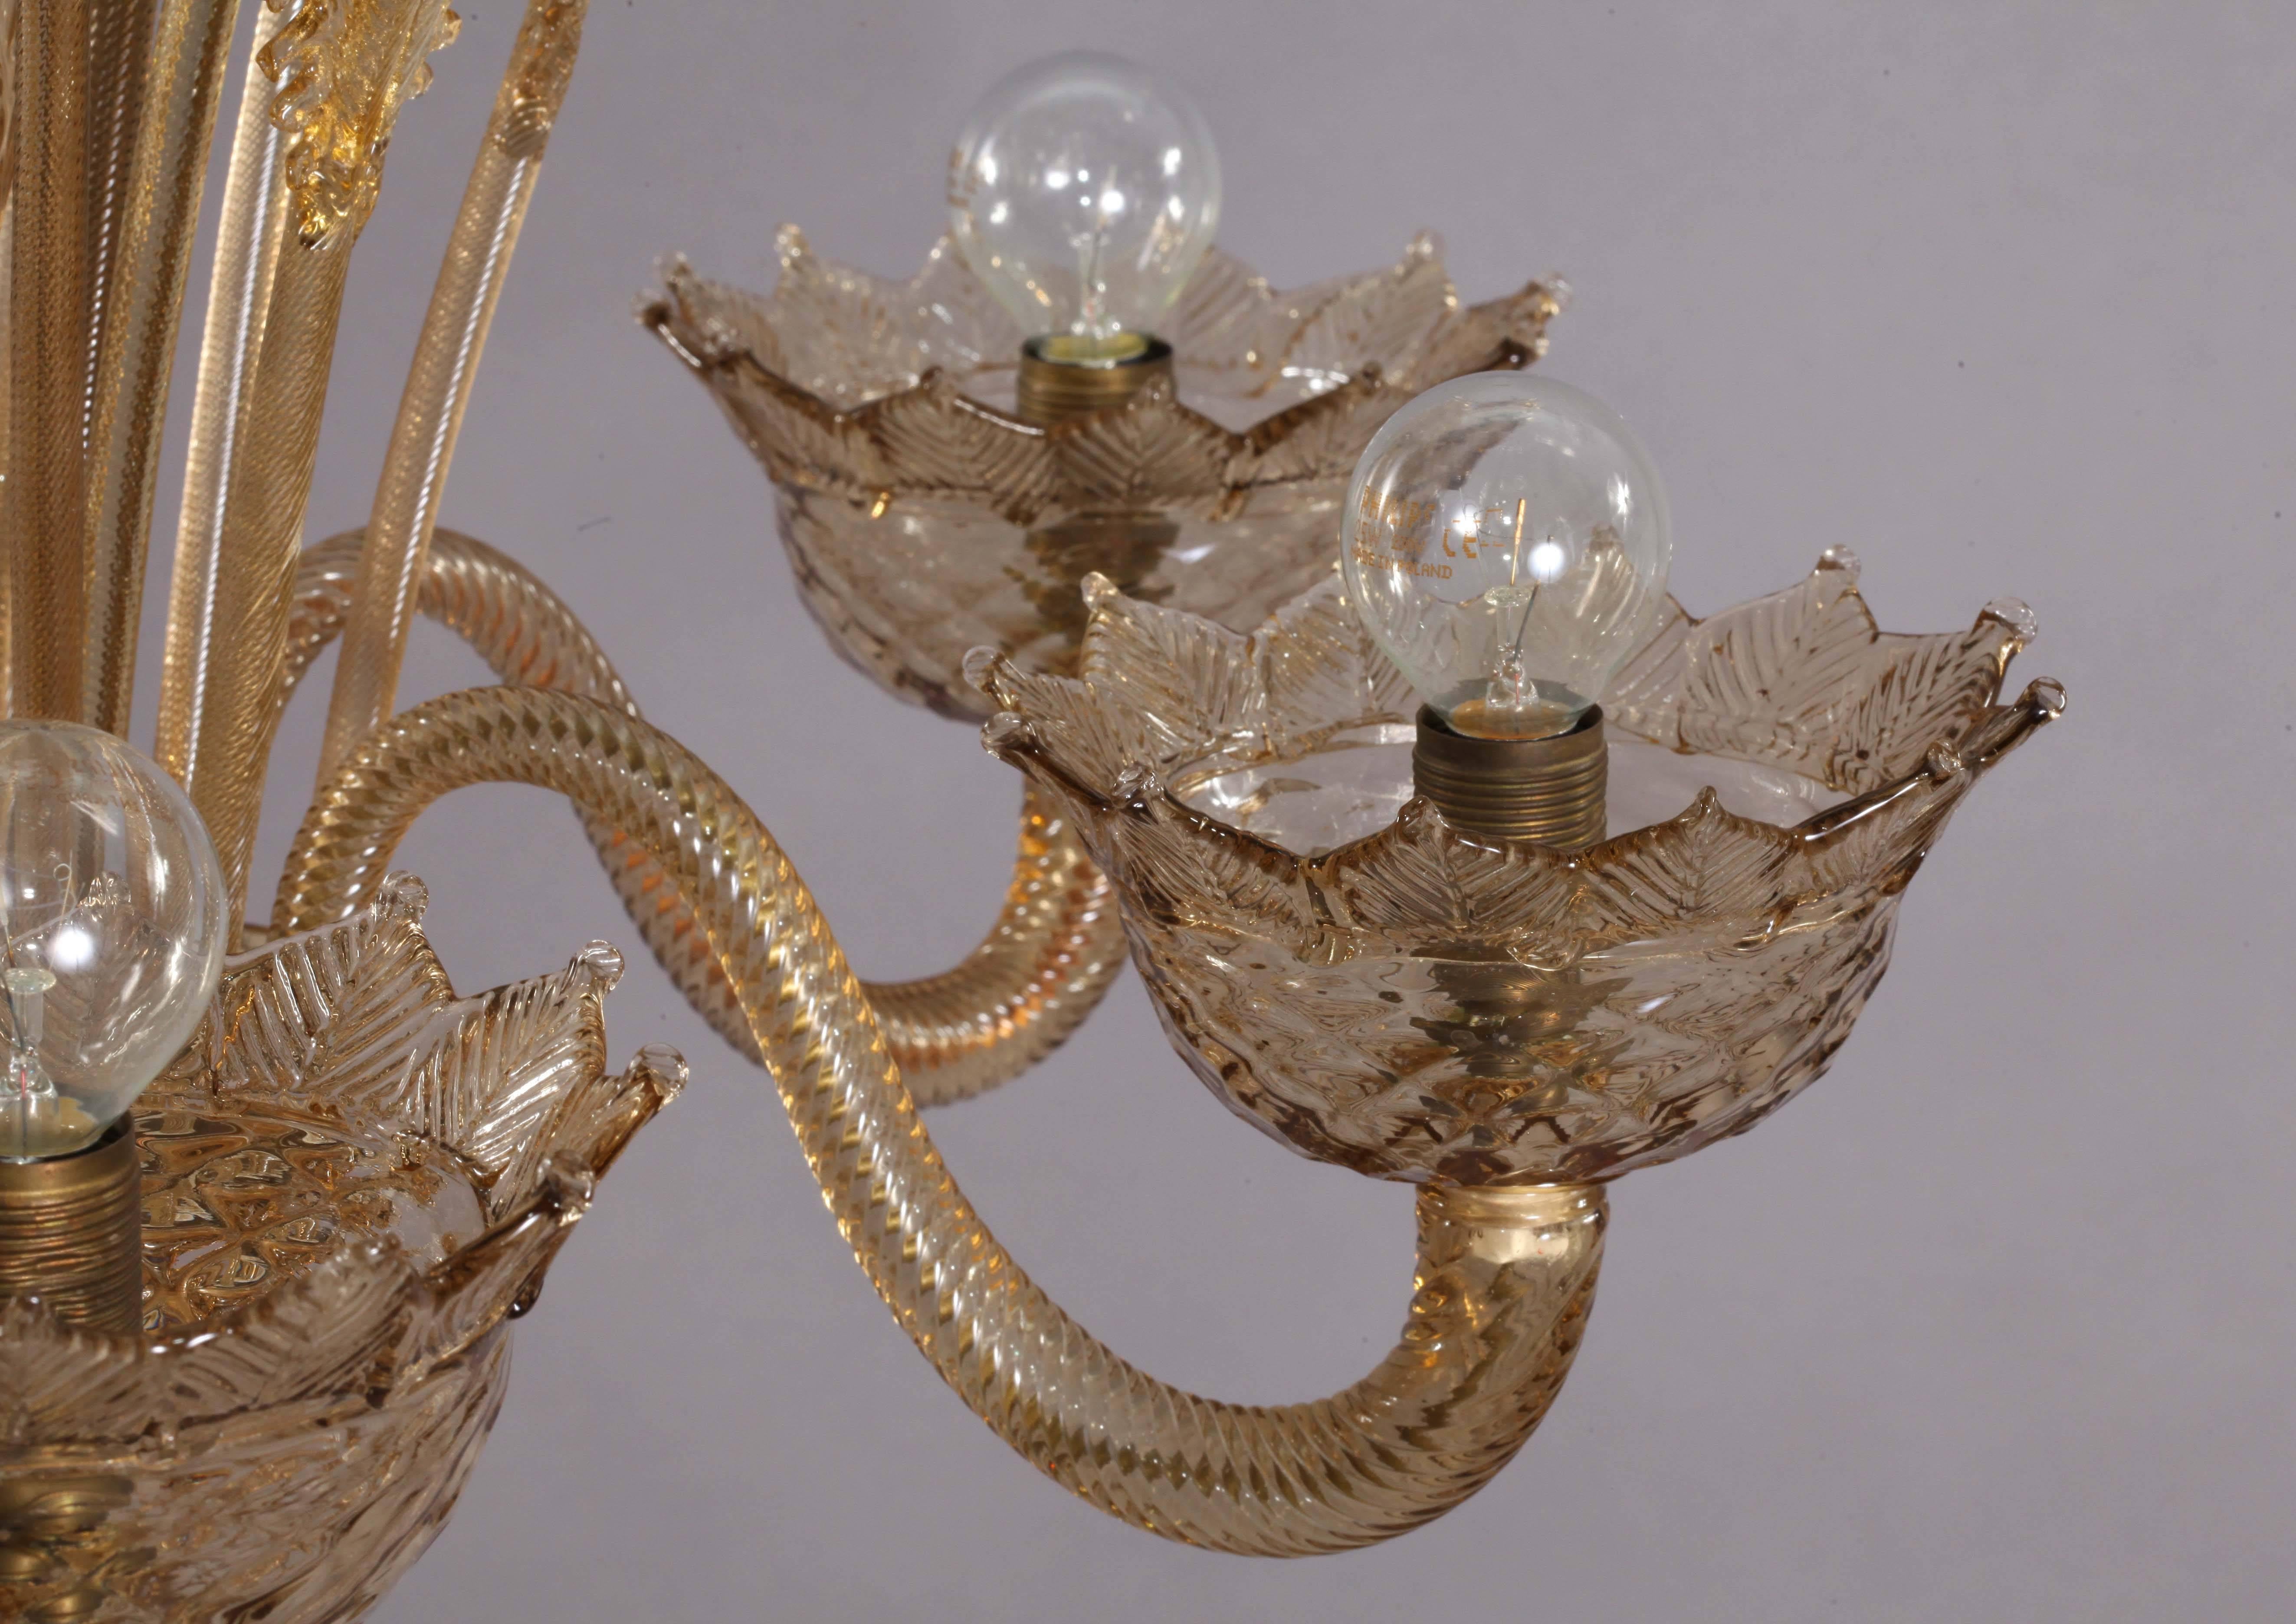 Handblown Classic honey Murano glass chandelier from Italy, circa 1940. Newly rewired with UL listed parts and six candelabra sockets. Features three handblown honey glass flowers and three glass leaves on stems!
Comes with one flower stem and one